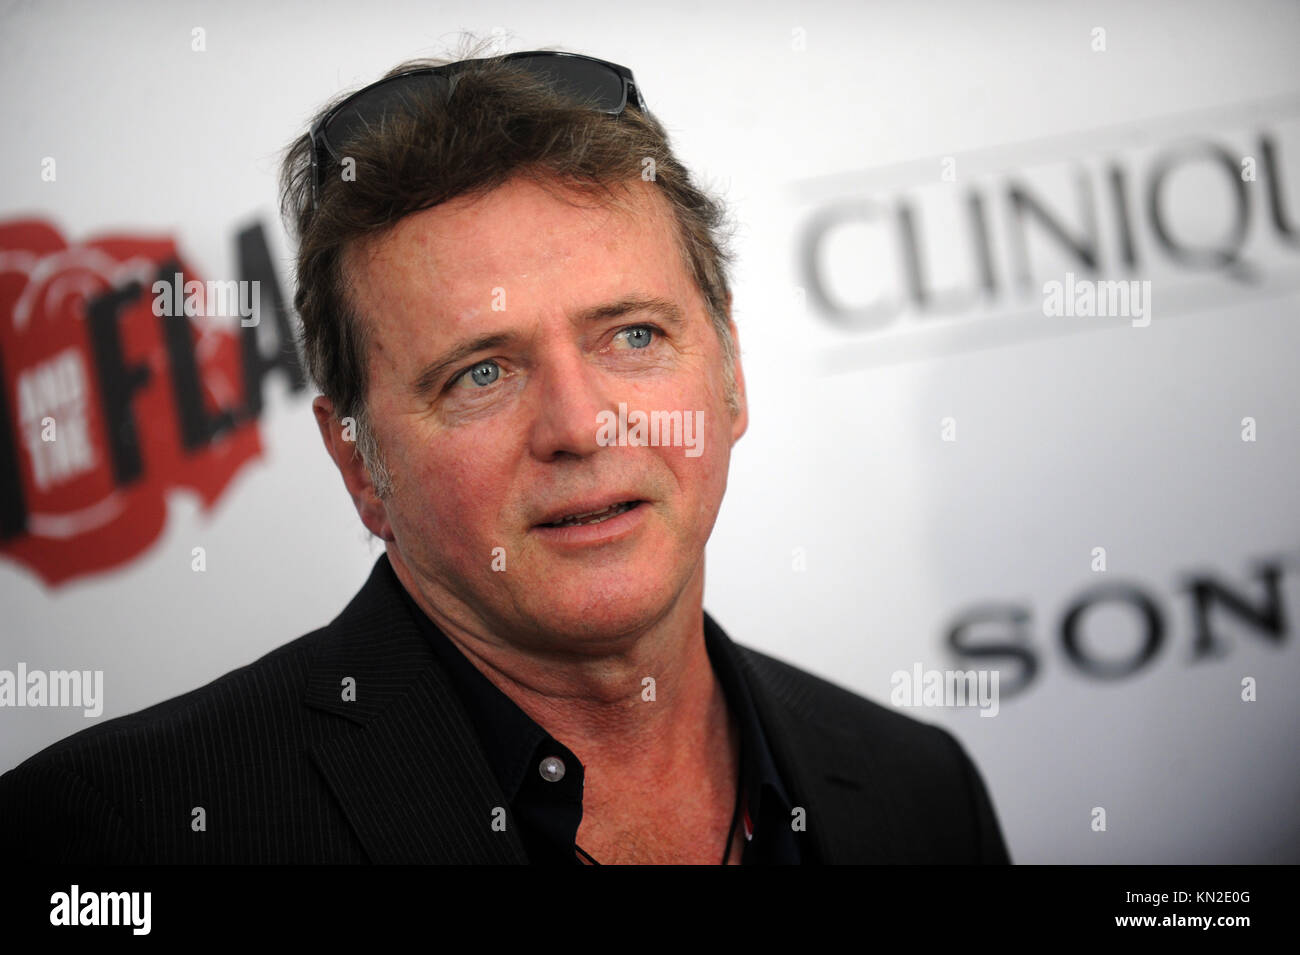 NEW YORK, NY - AUGUST 03: Aidan Quinn  attends the 'Ricki And The Flash' New York premiere at AMC Lincoln Square Theater on August 3, 2015 in New York City.  People:  Aidan Quinn Stock Photo